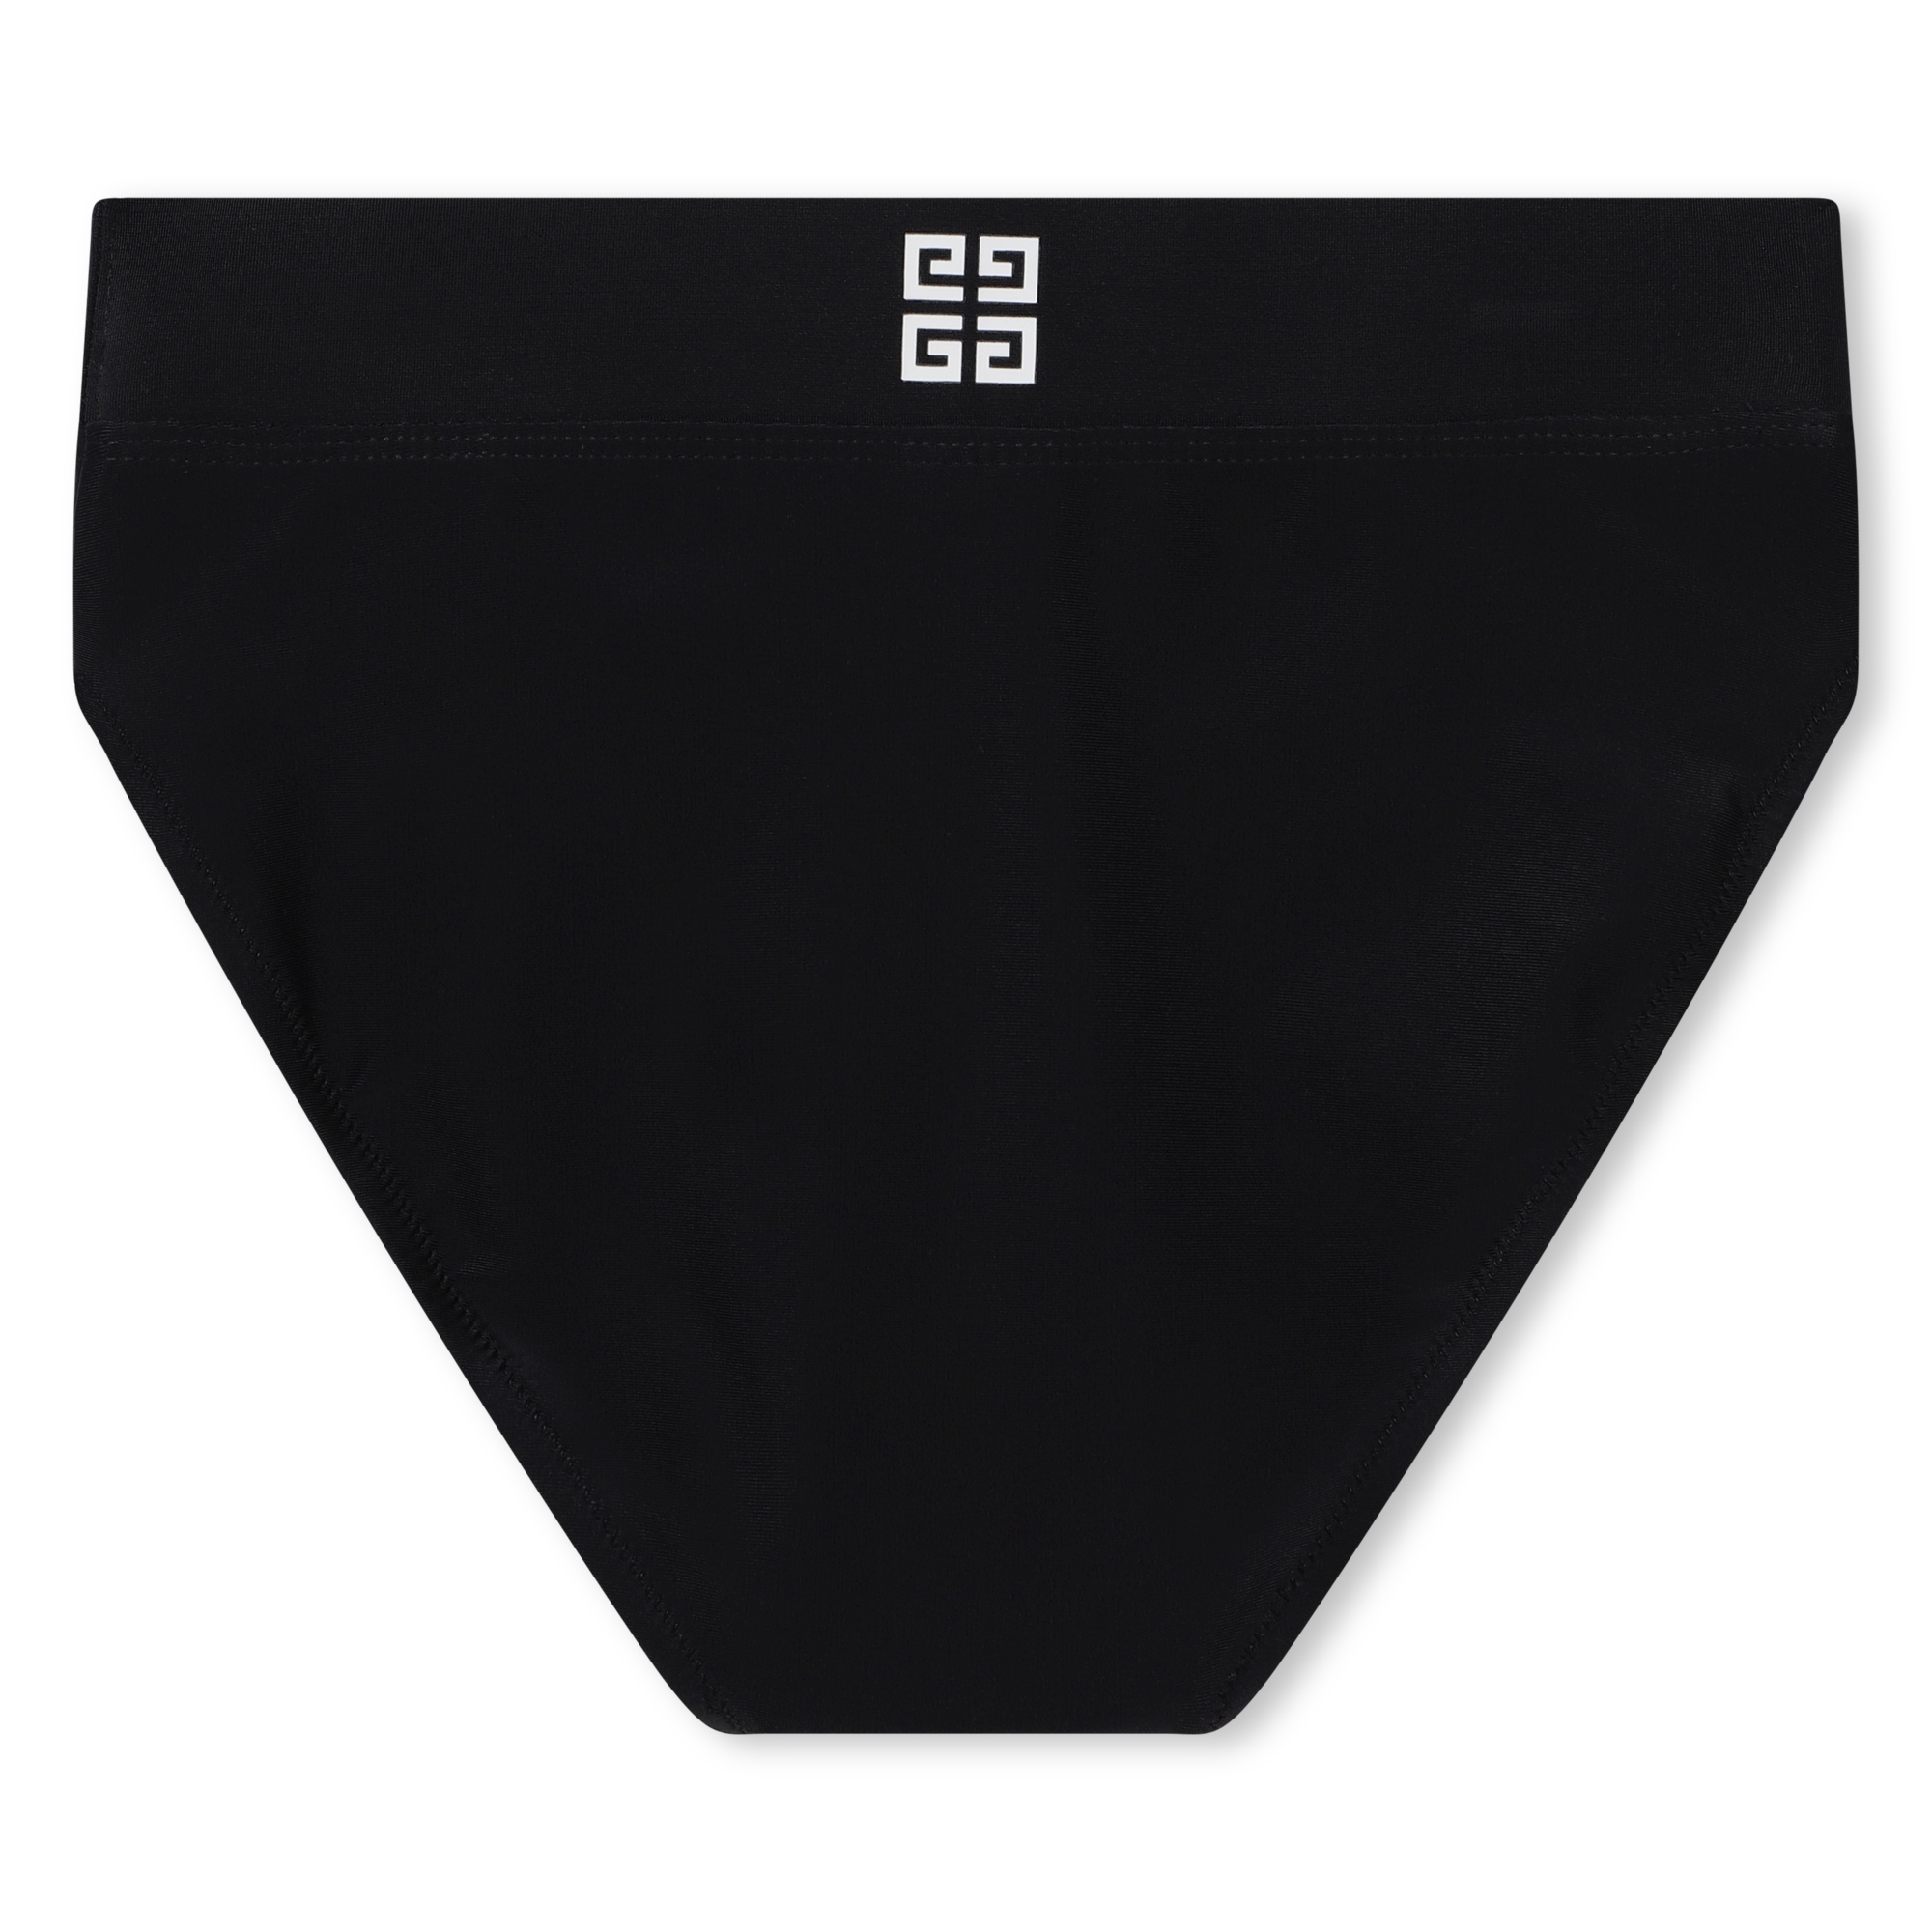 Lined bathing suit GIVENCHY for GIRL